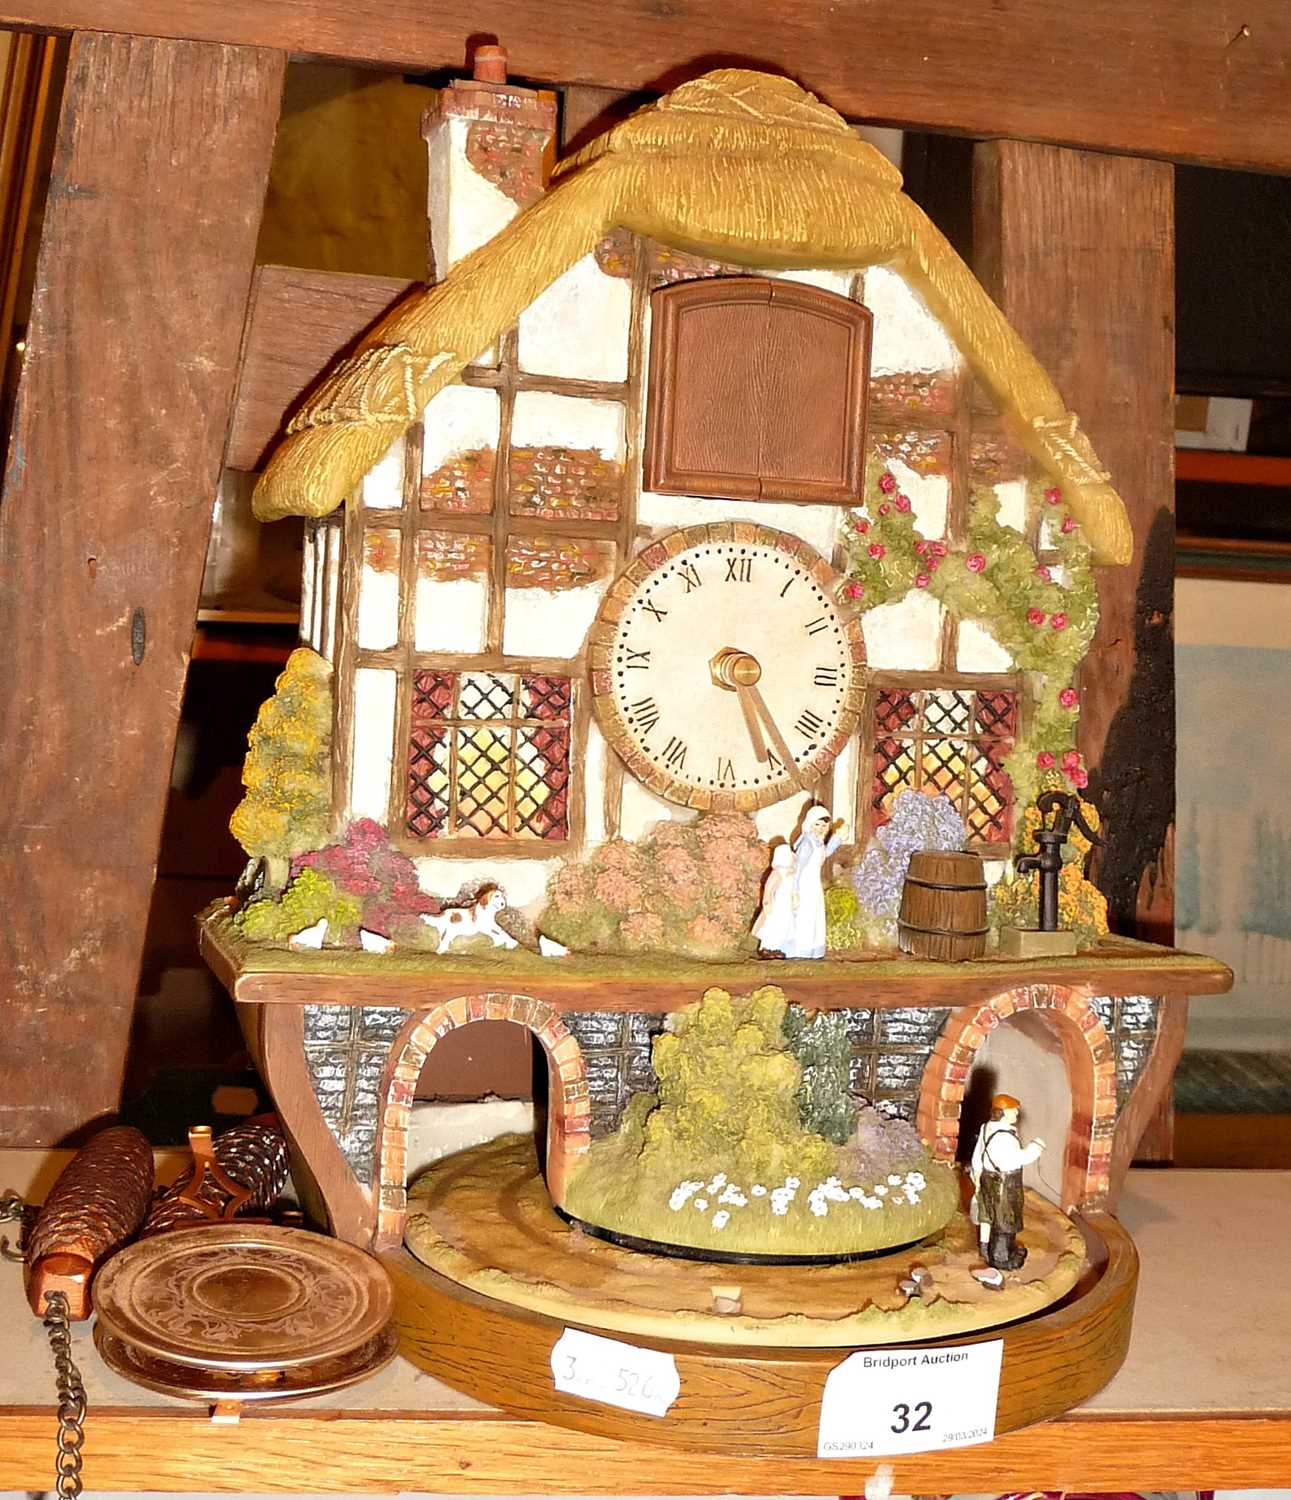 Novelty cuckoo clock "Country Days" of a Swiss farmhouse with figures (A/F)